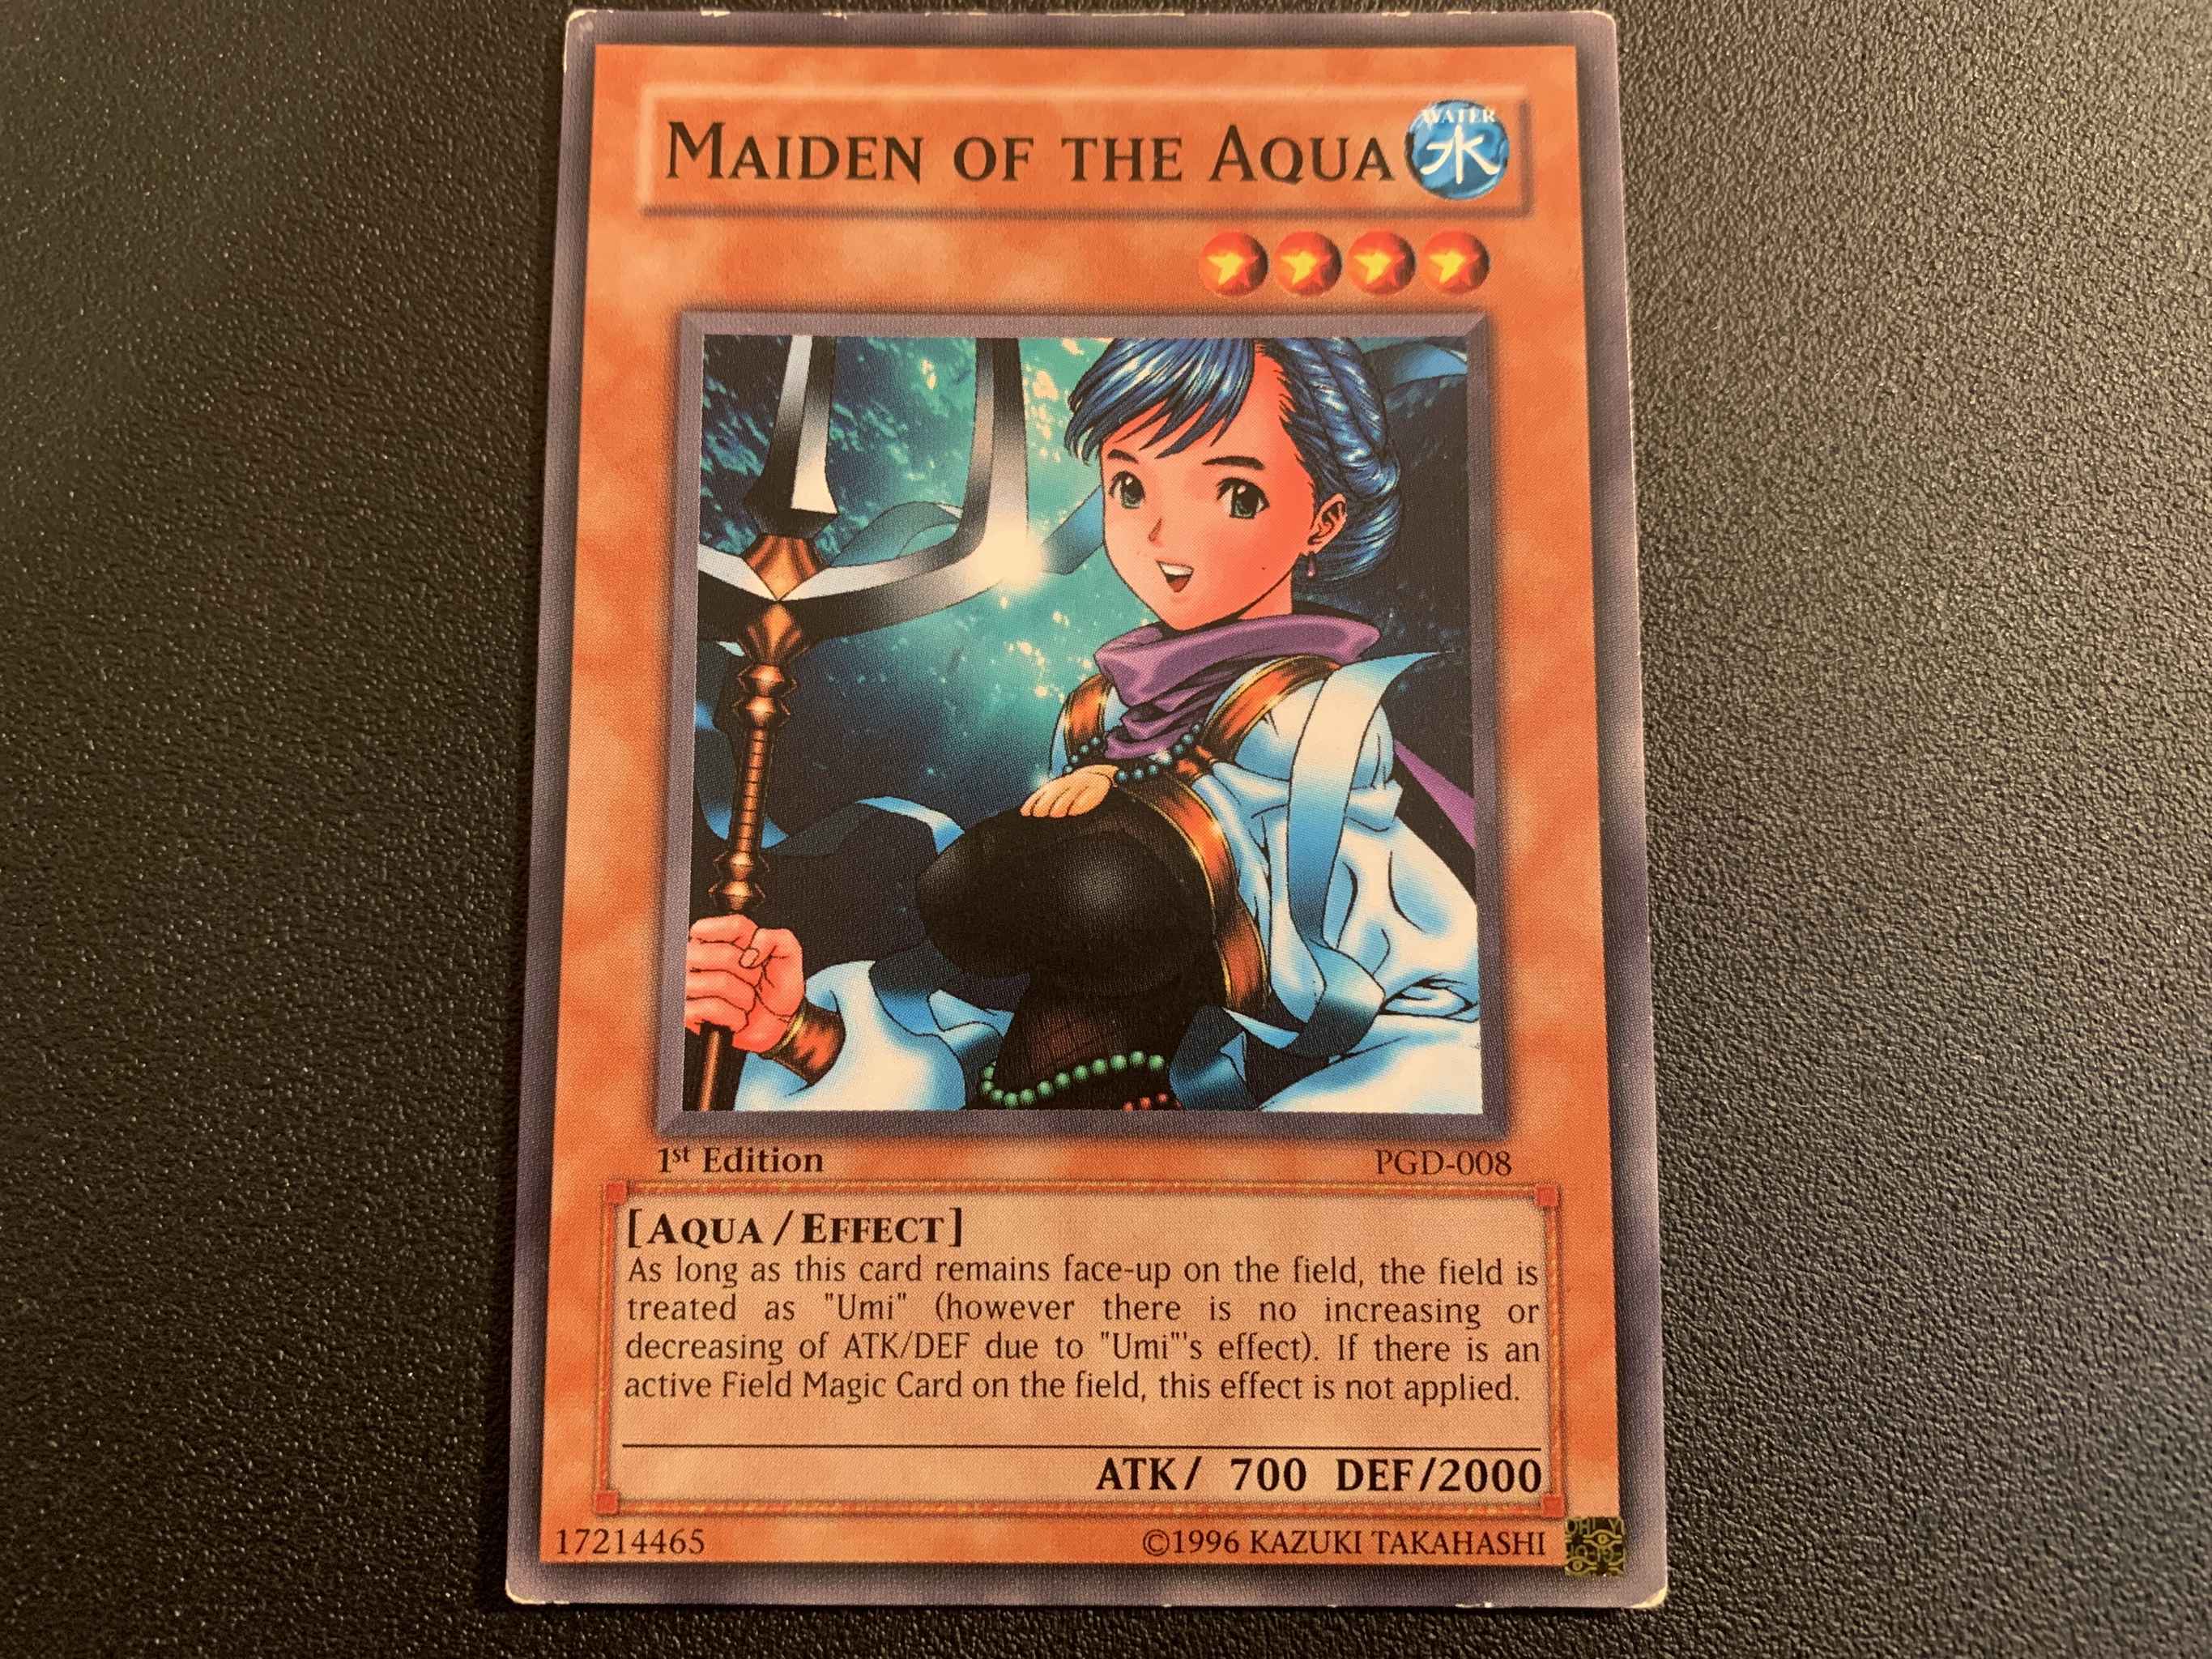 1st Edition PGD-008 *M-NM!* Common Yu-Gi-Oh!: Maiden Of The Aqua 